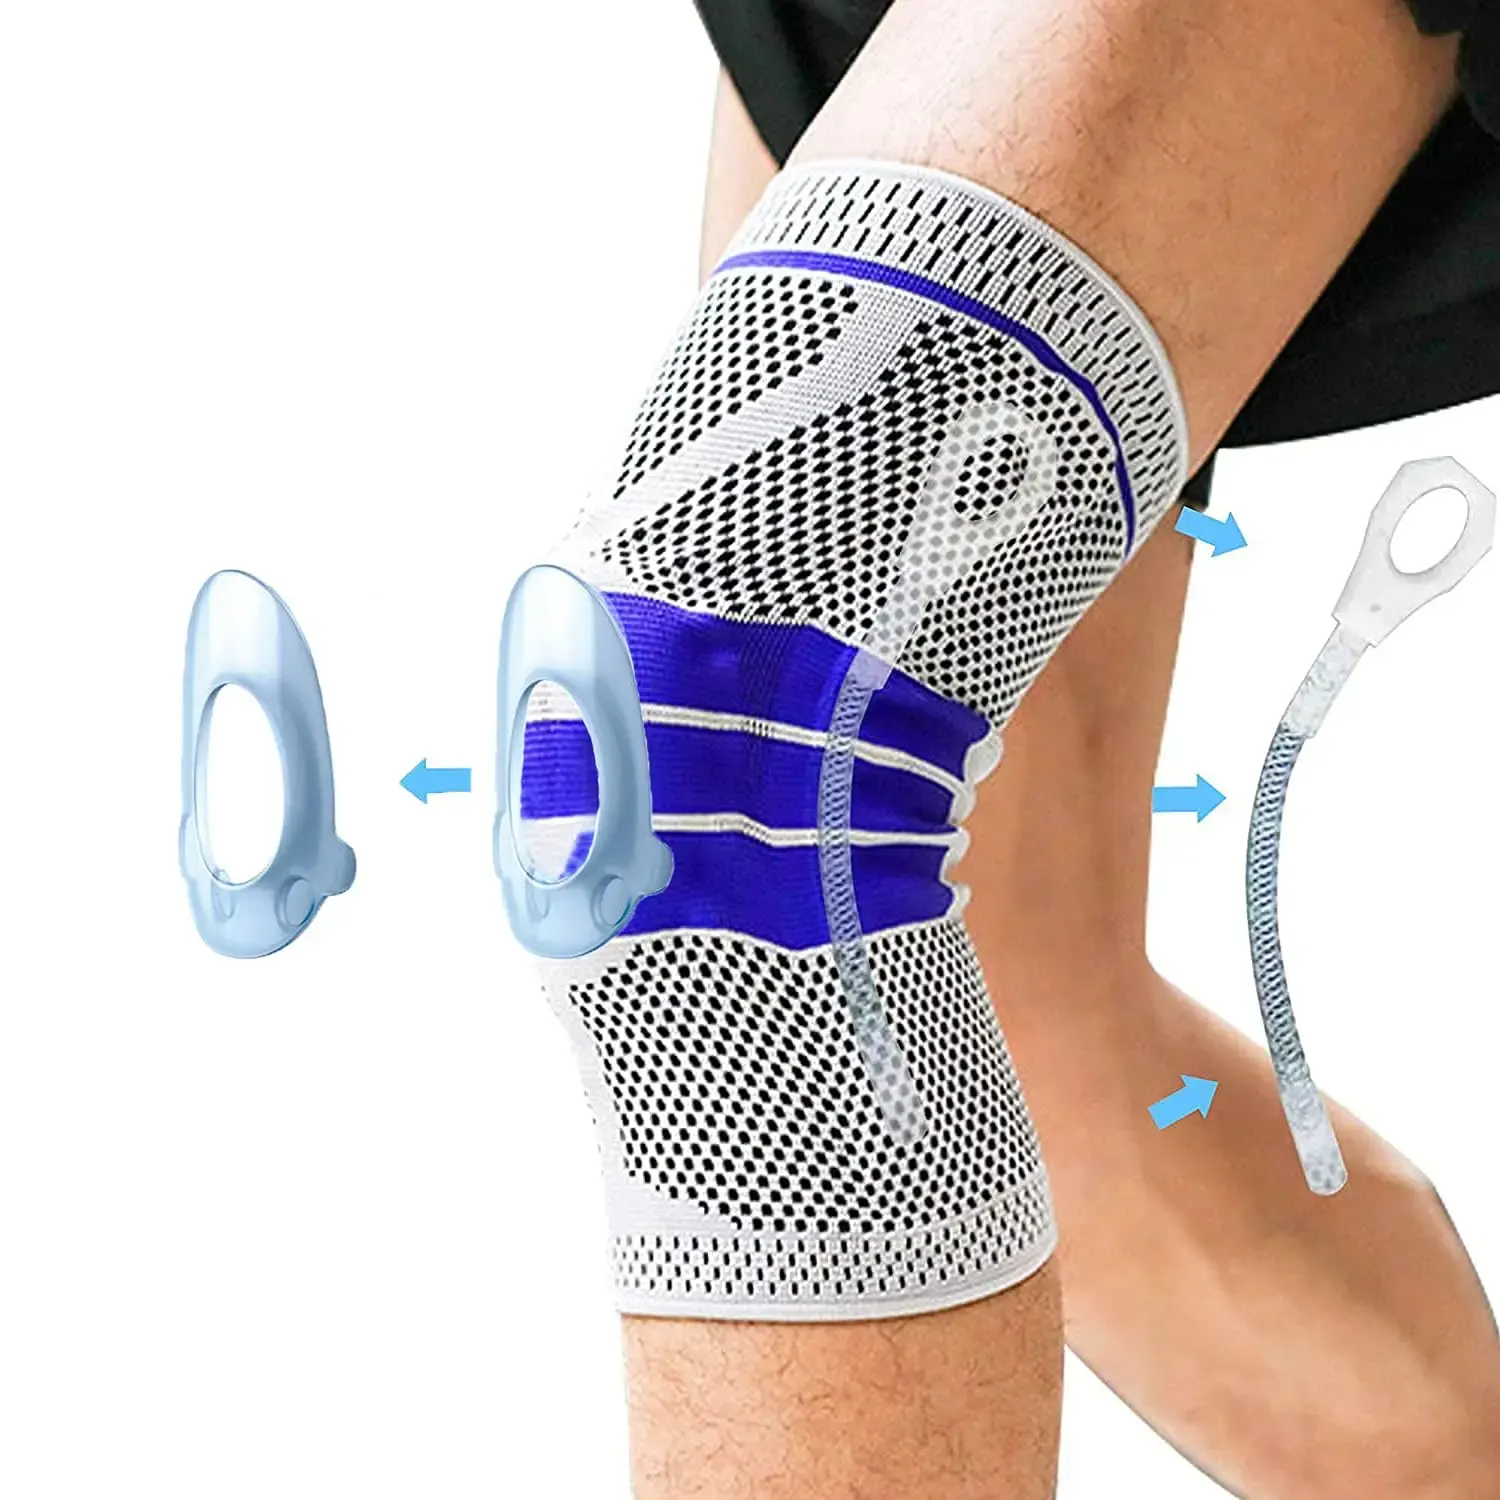 Knee Padded Patella Support Mediplus features